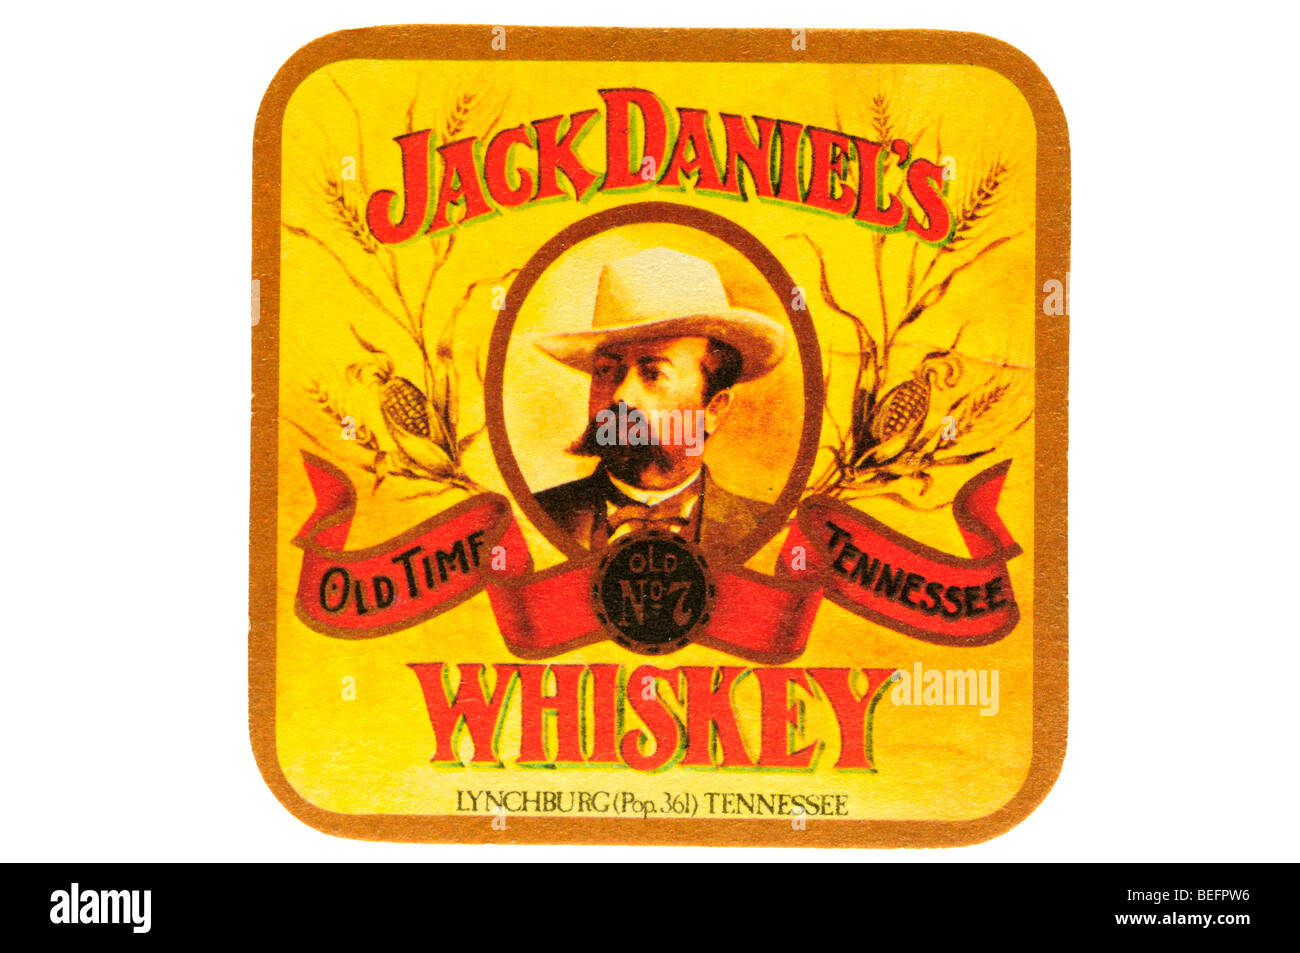 jack daniels old no 7 brand old time tennessee whiskey Stock Photo